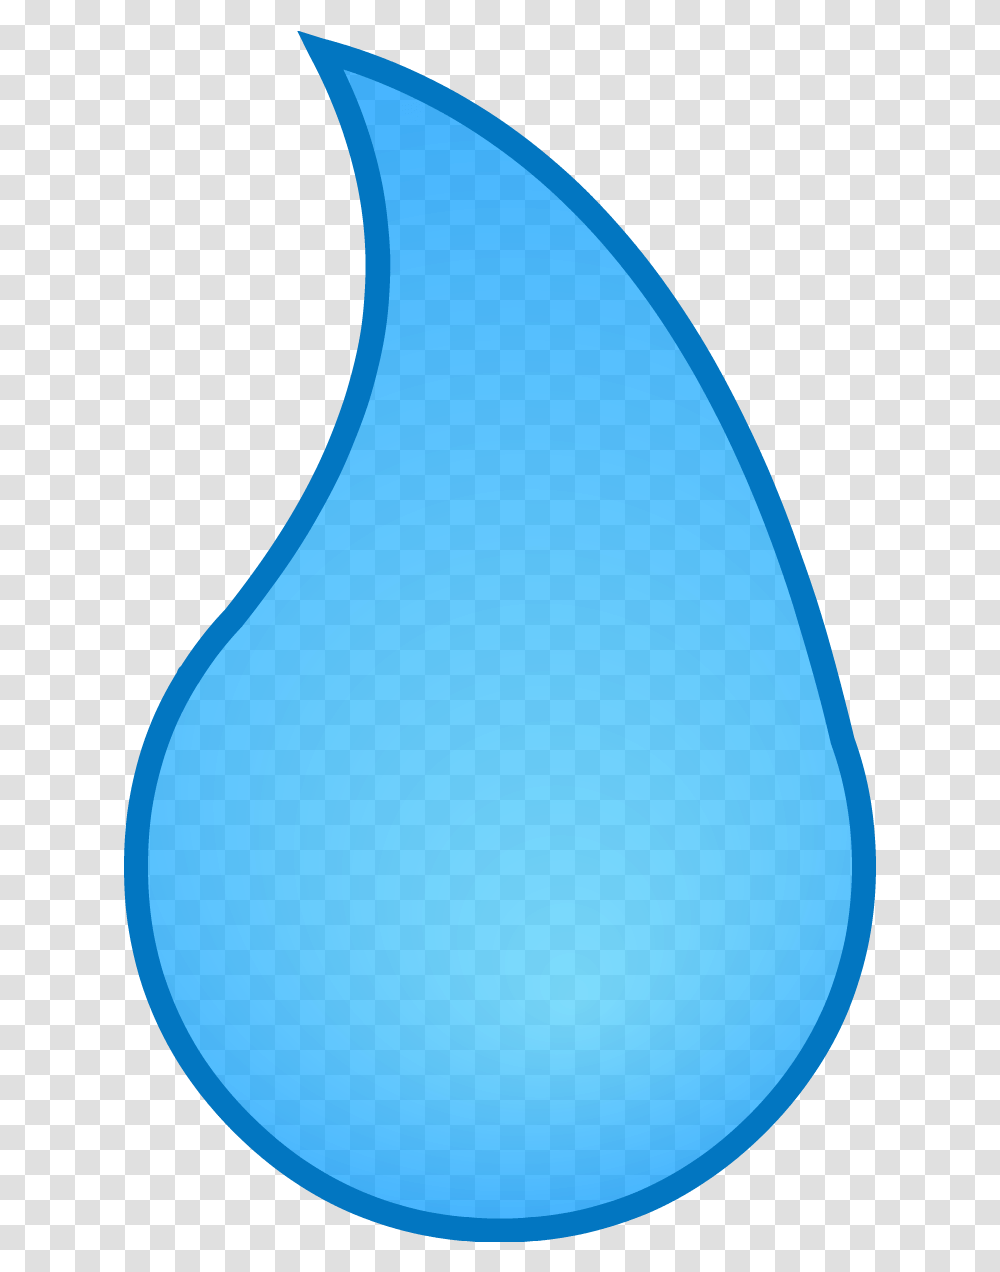 Download Tear Picture Tear, Balloon, Lighting, Droplet, Lamp Transparent Png